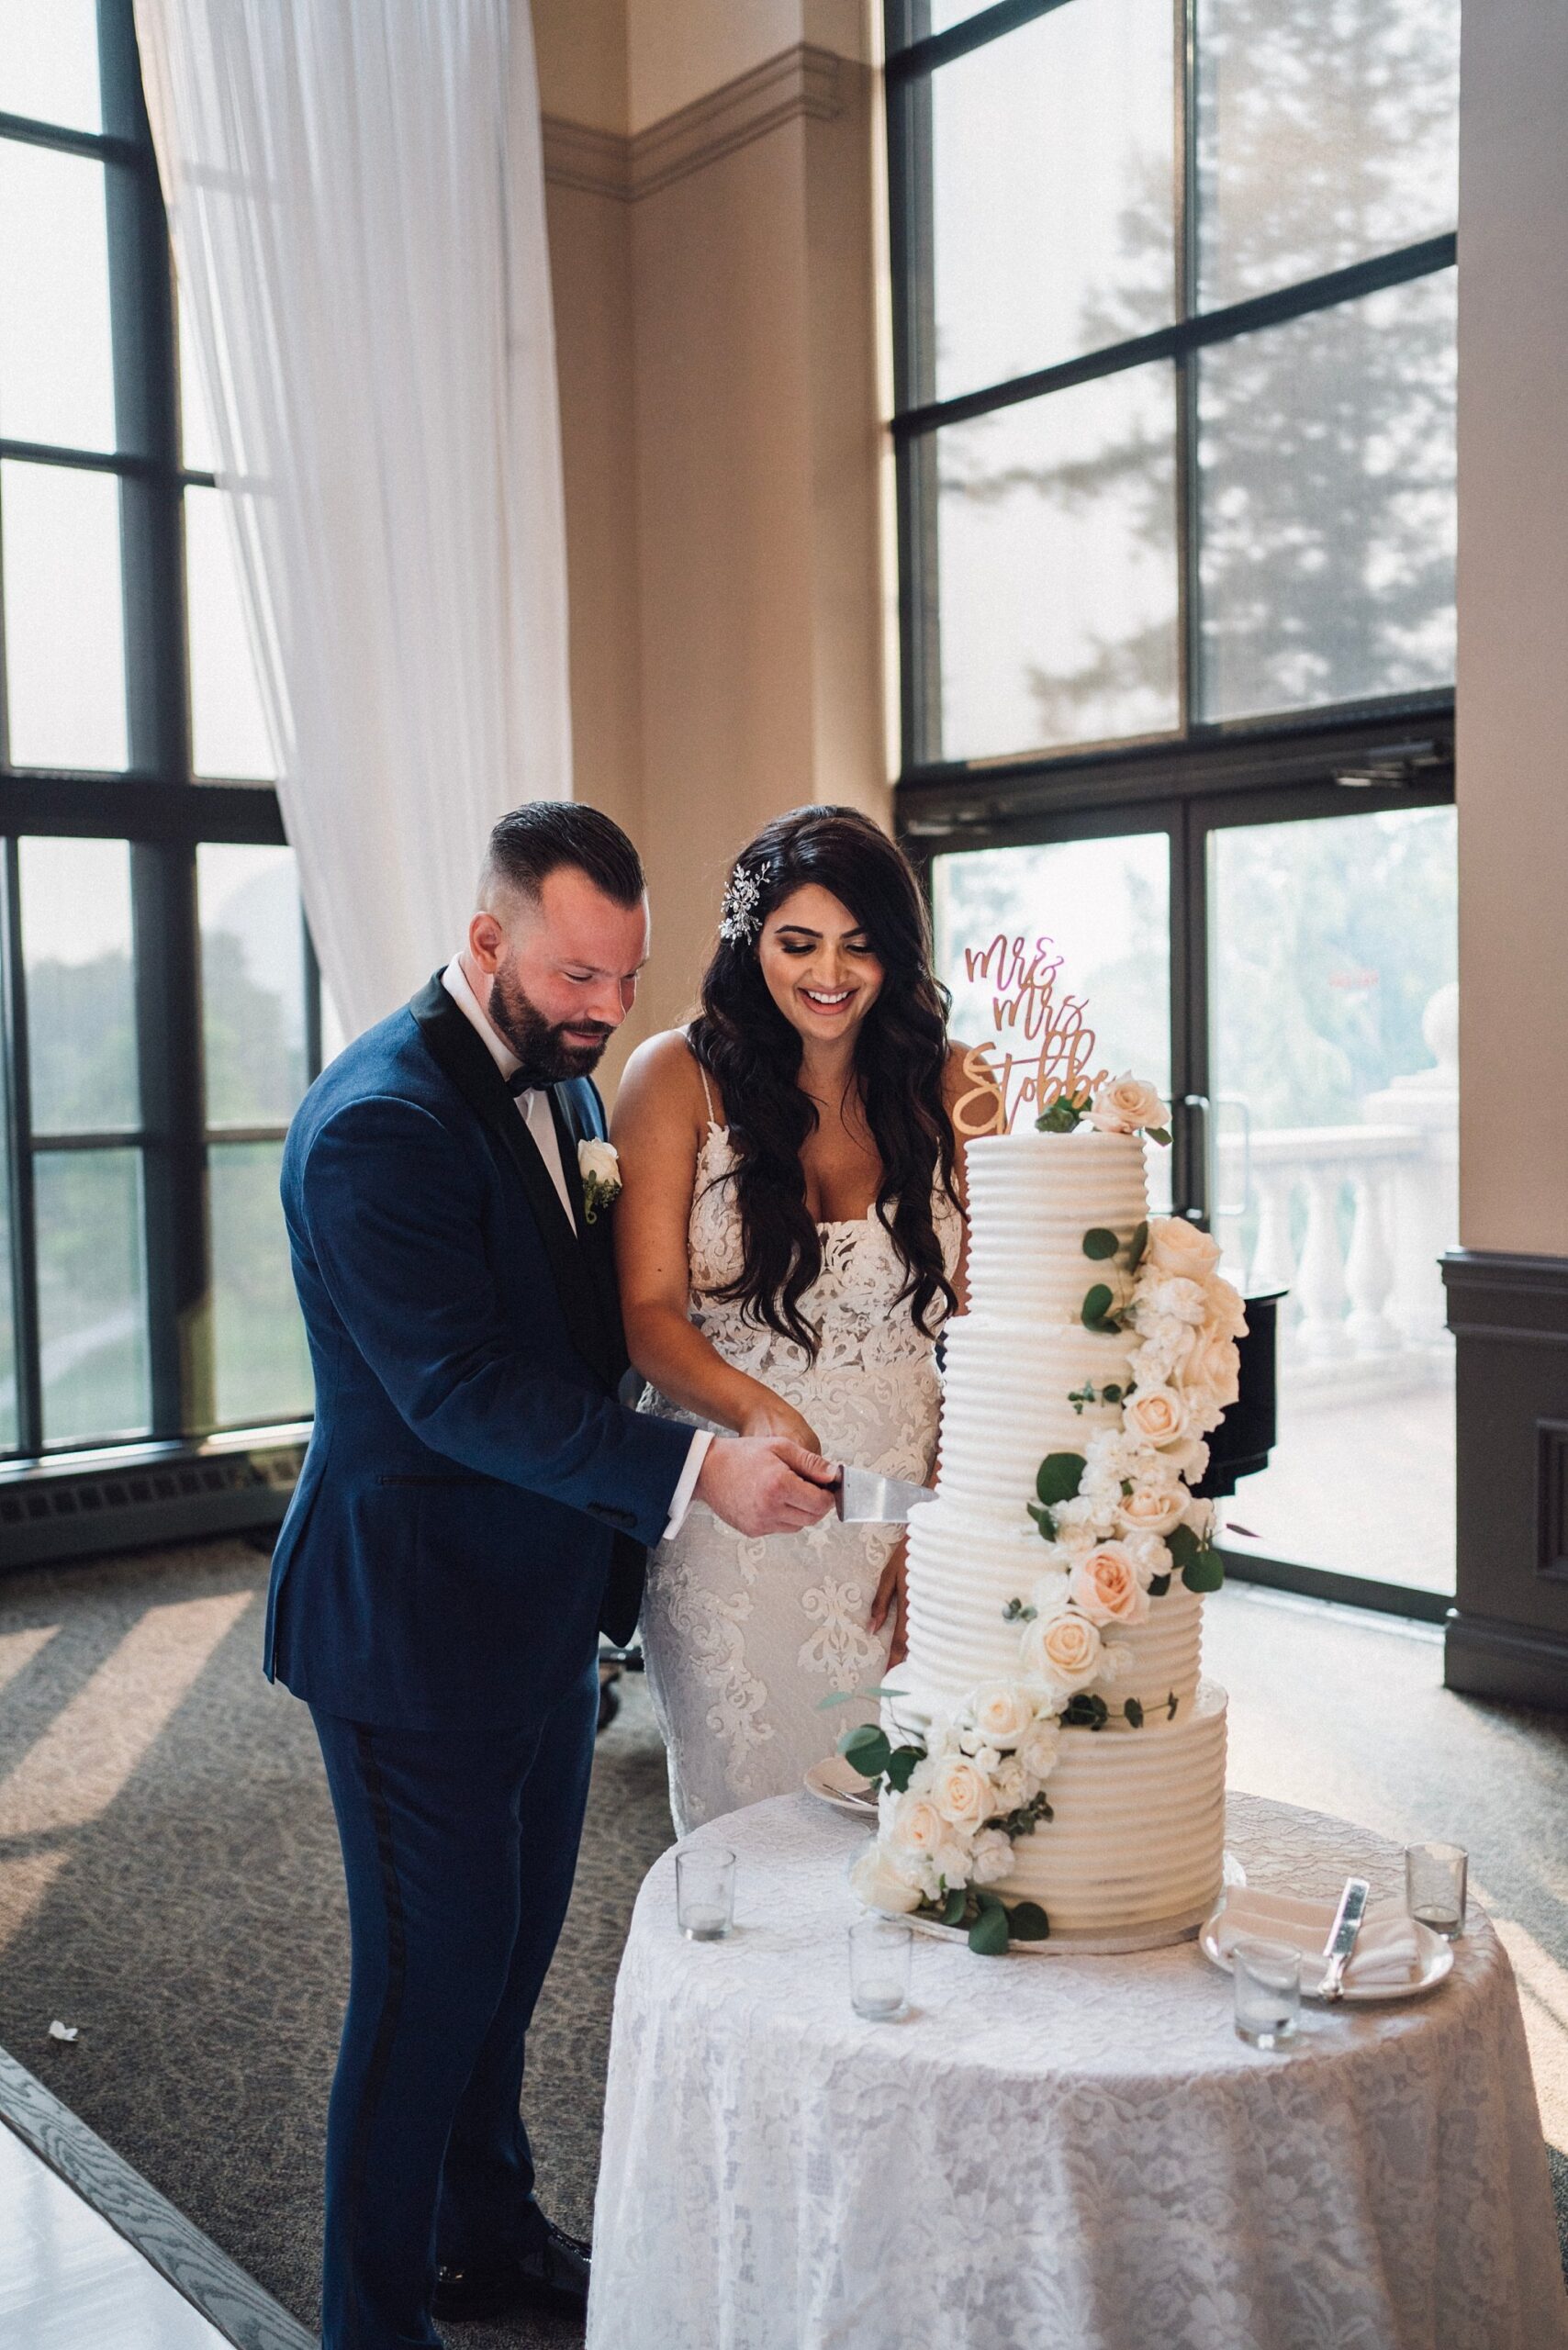 bride and groom cutting a 4 tier white wedding cake